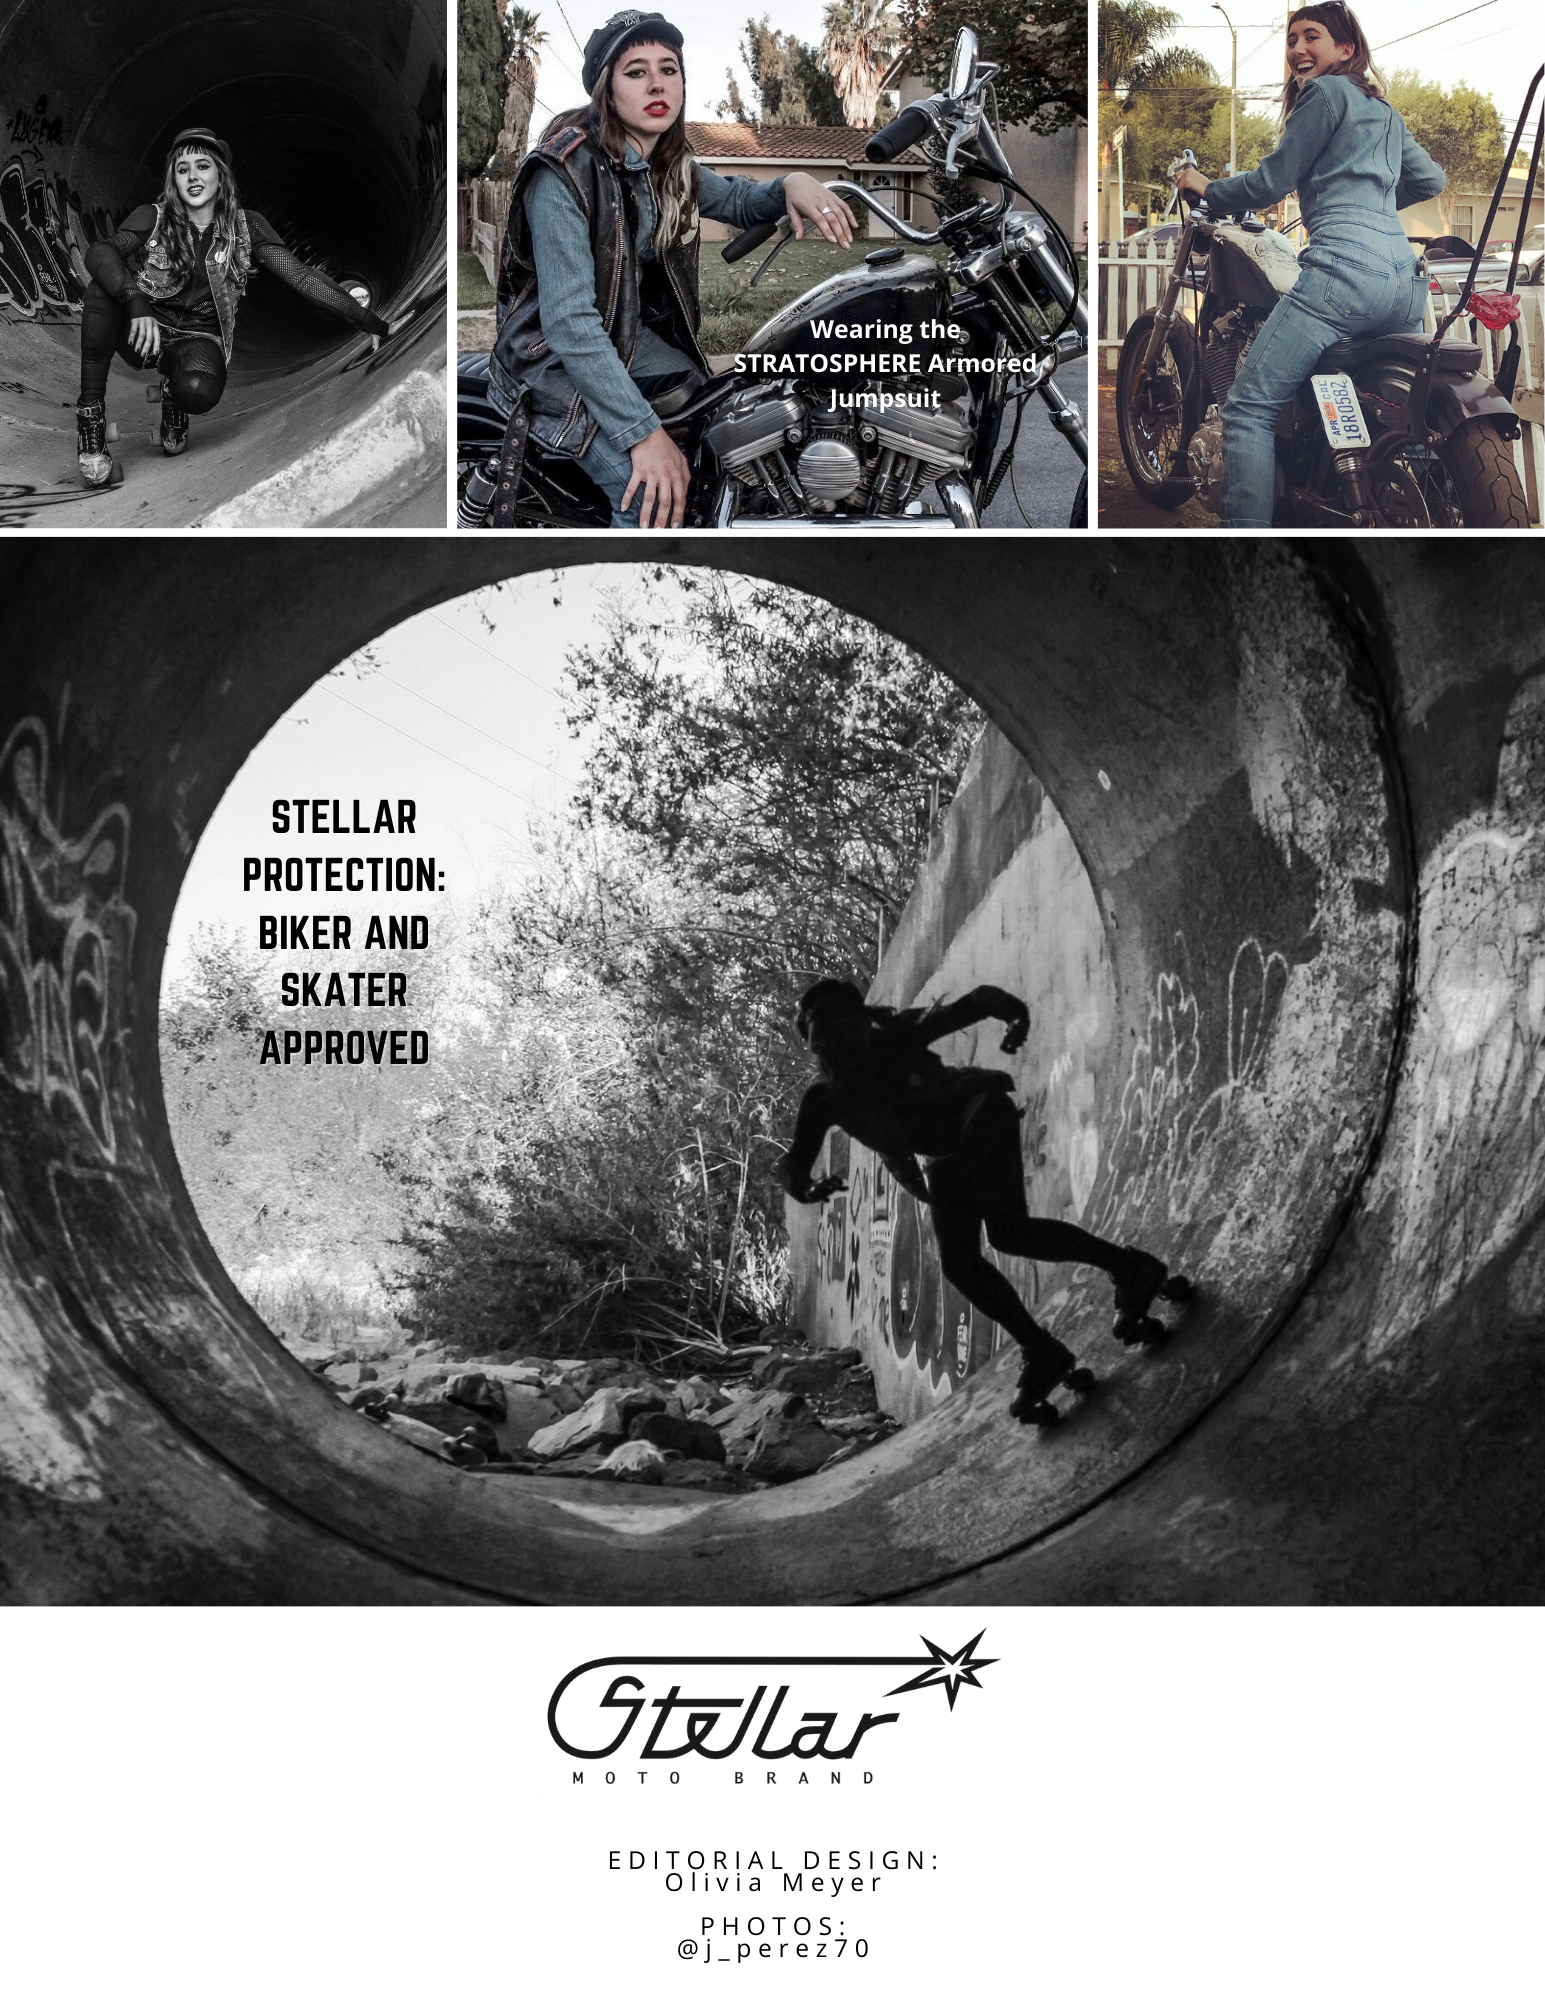 Stellar Protection: Biker and Skater approved